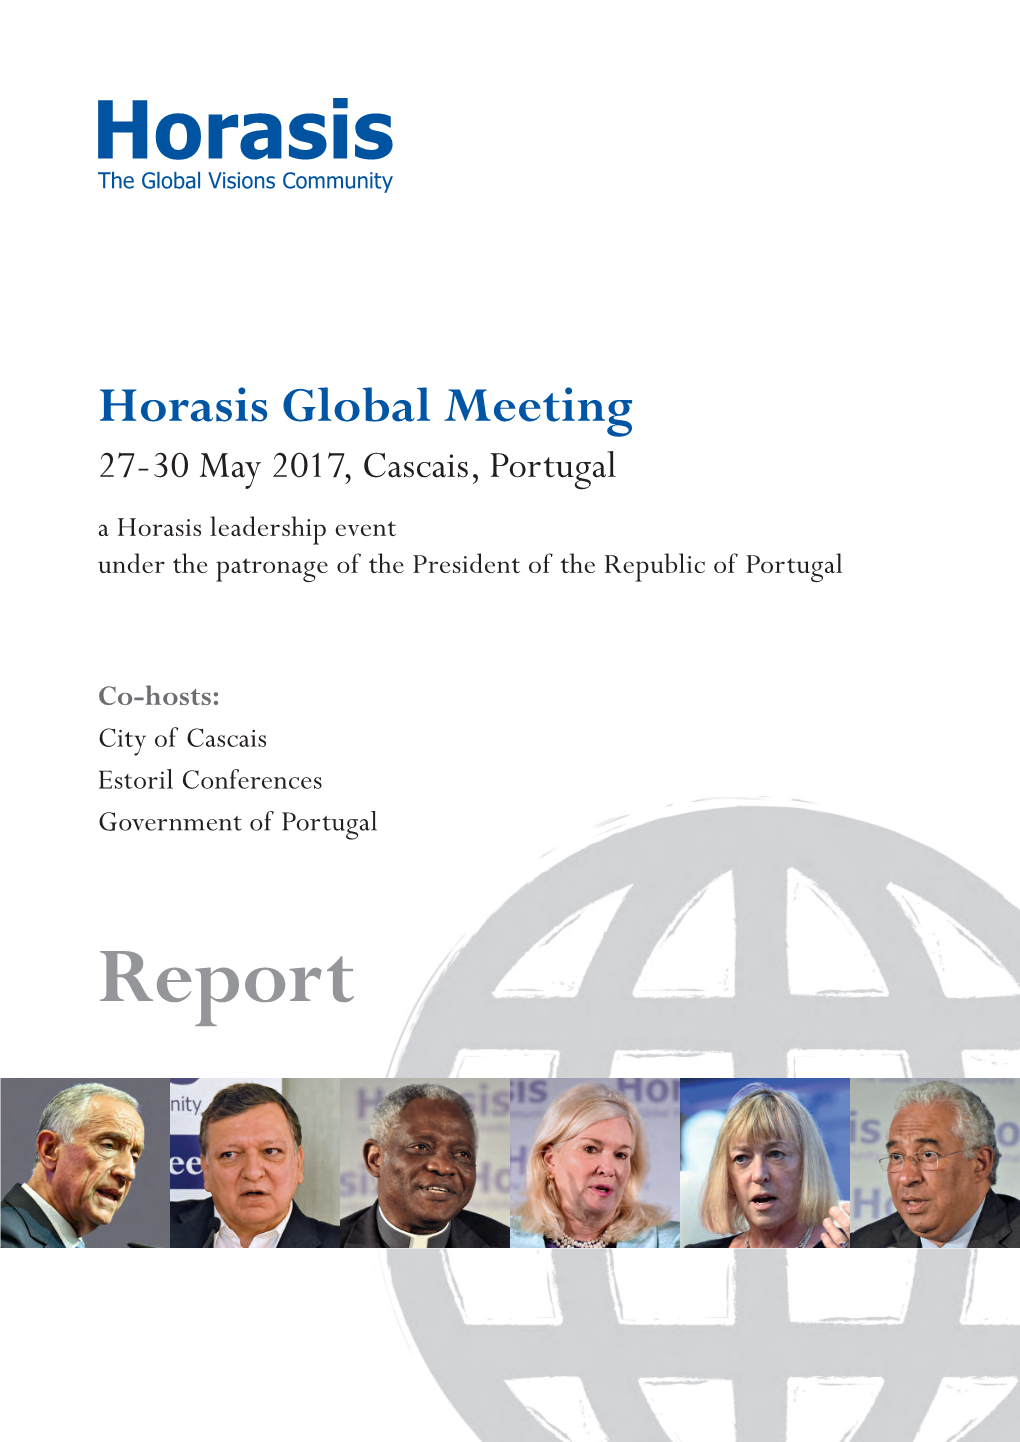 Horasis Global Meeting 27 -30 May 201 7, Cascais, Portugal a Horasis Leadership Event Under the Patronage of the President of the Republic of Portugal